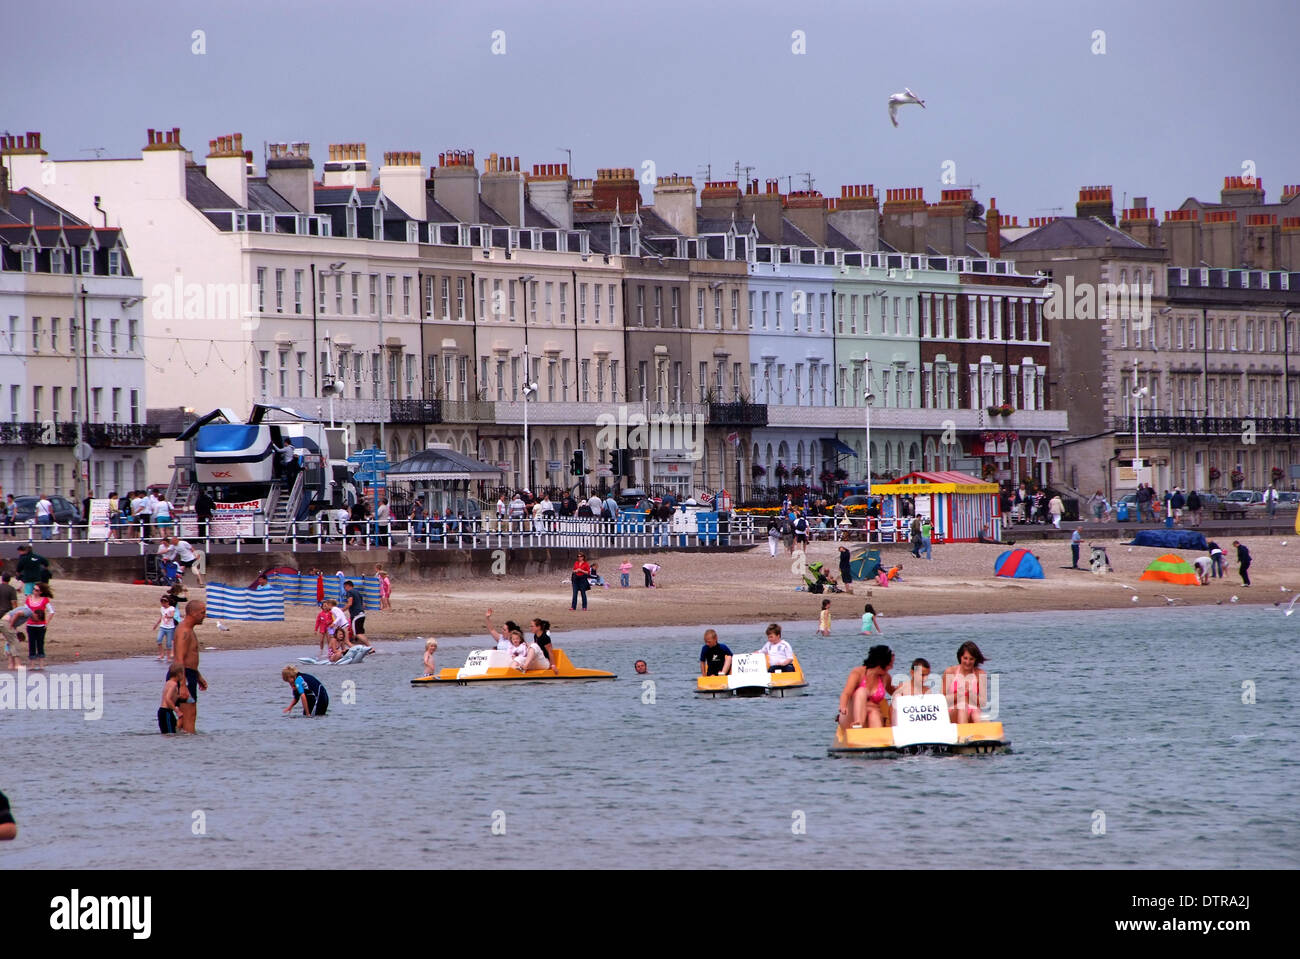 Weymouth in Dorset, showing the beach, the marina, harbour, statue of the Prince Regent, promenade and a Punch & Judy show. Stock Photo